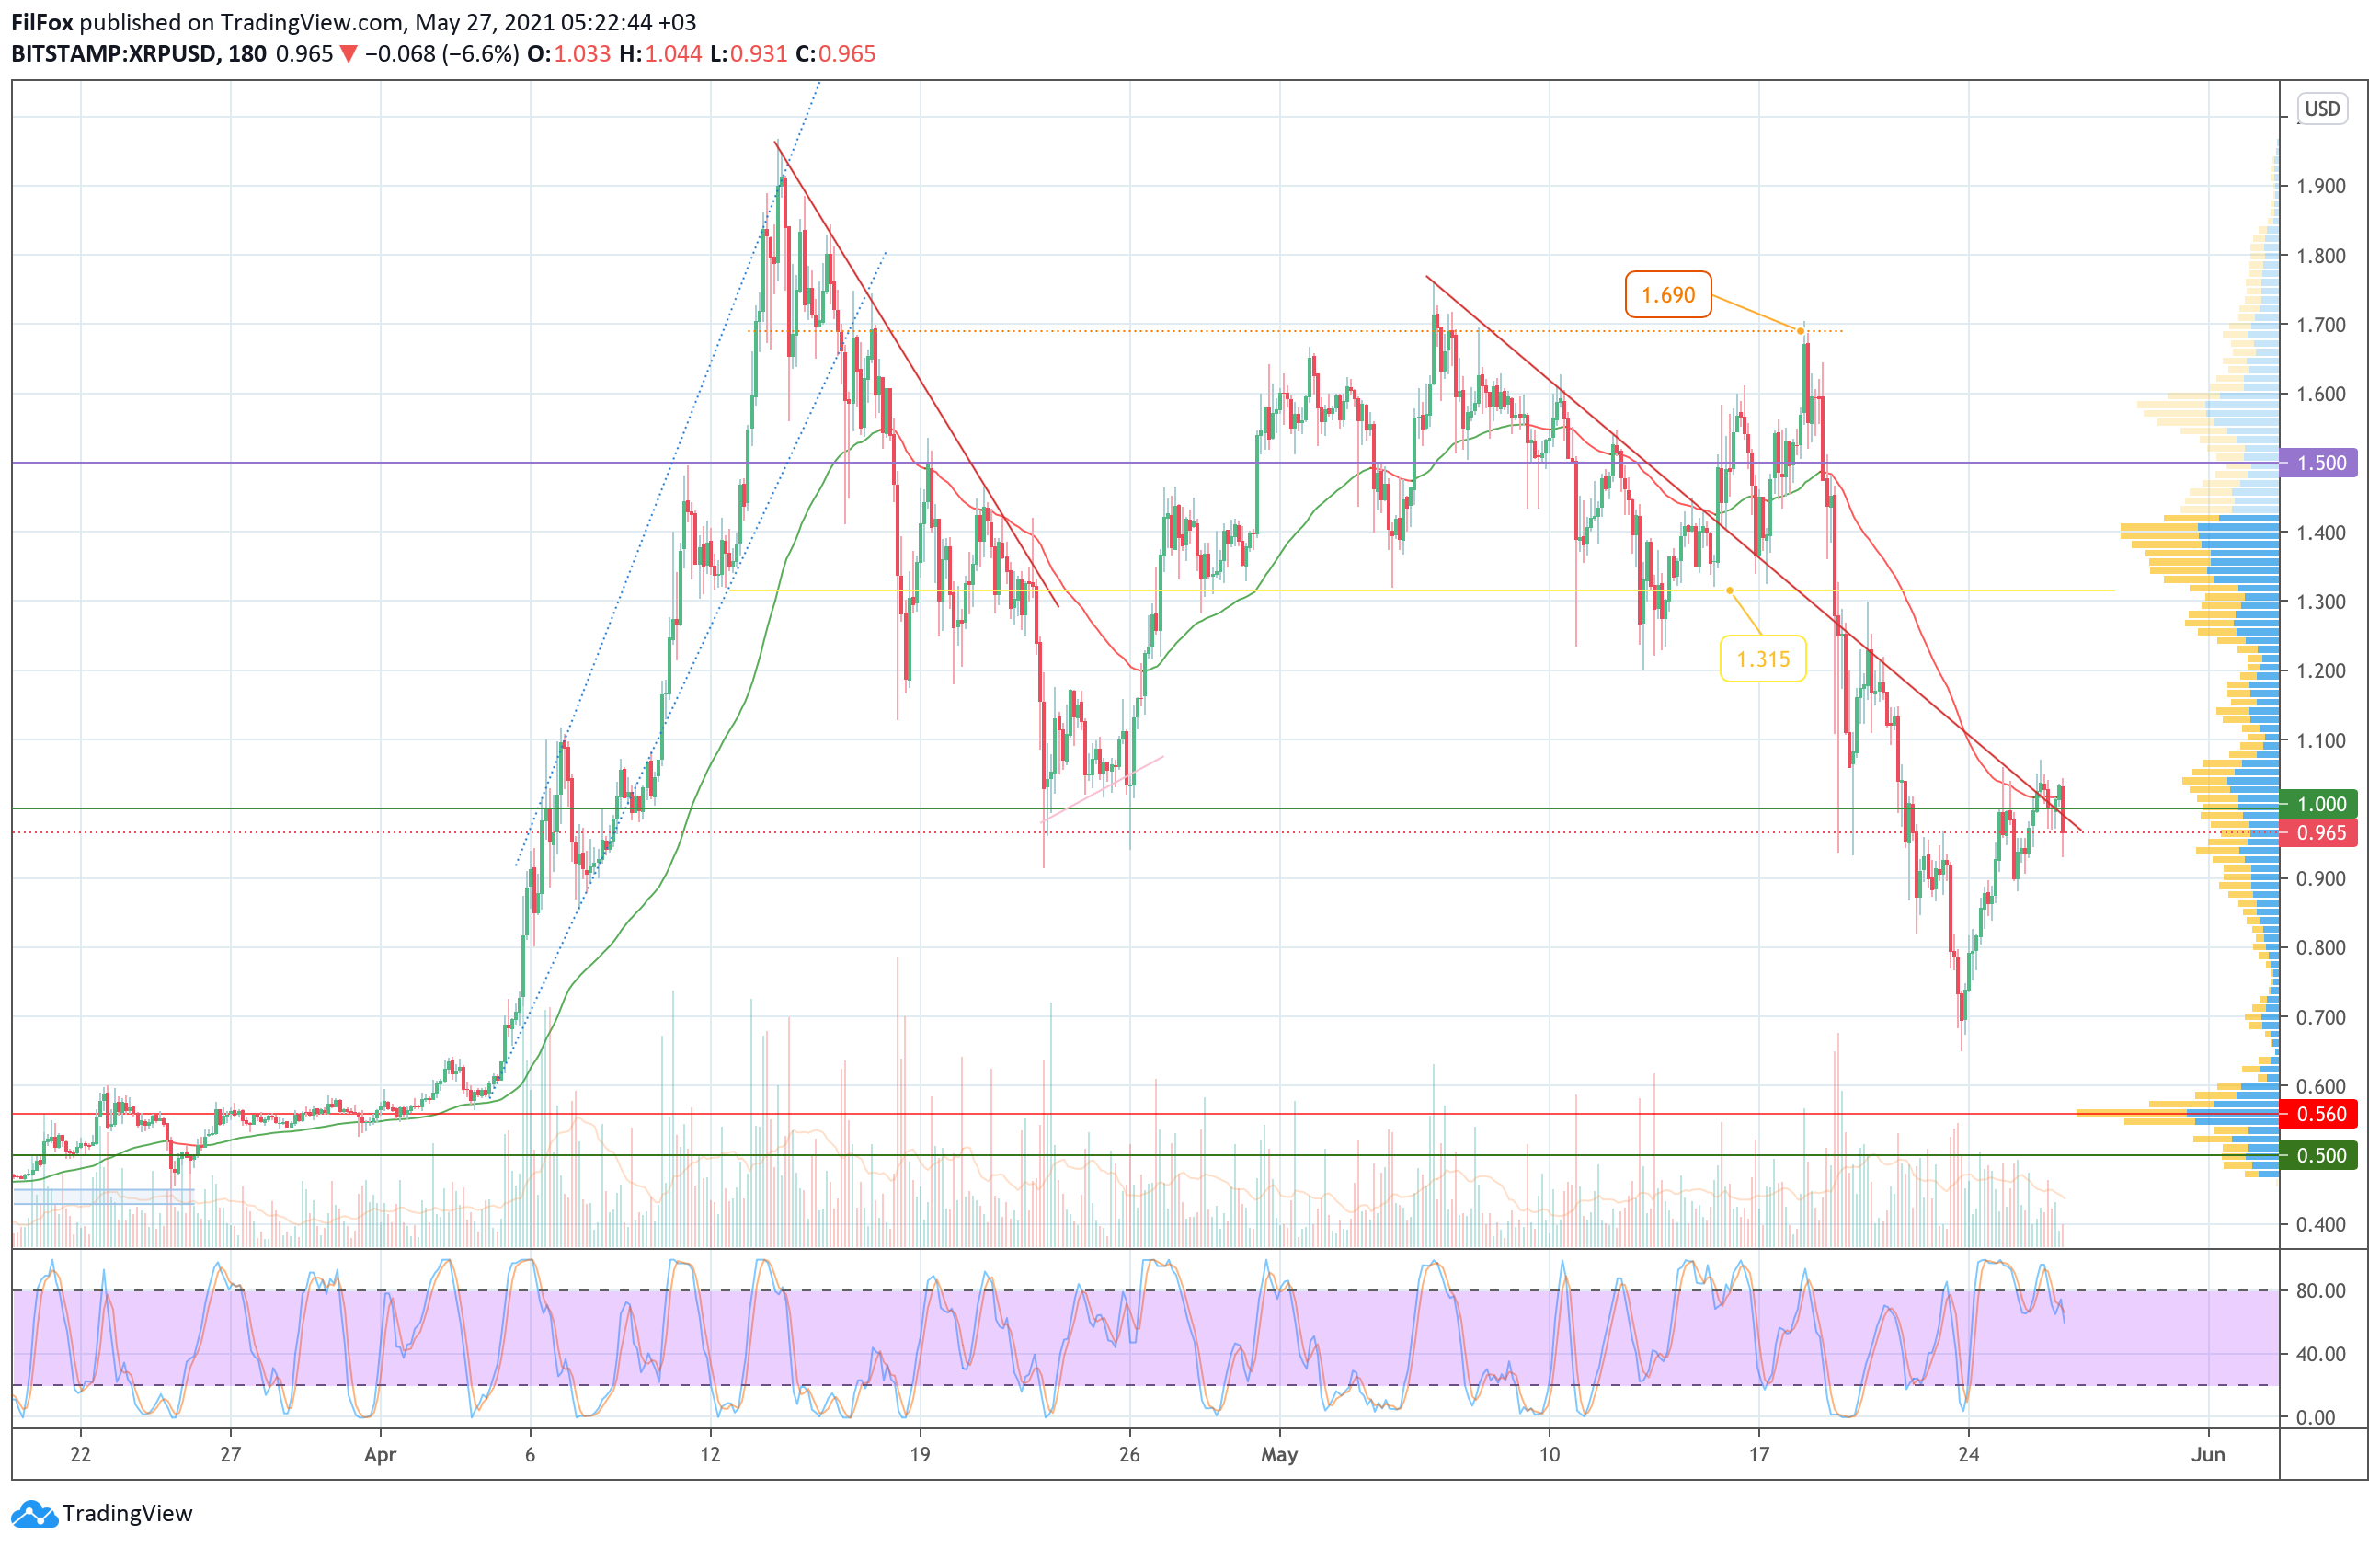 Analysis of prices for Bitcoin, Ethereum, XRP for 05/27/2021